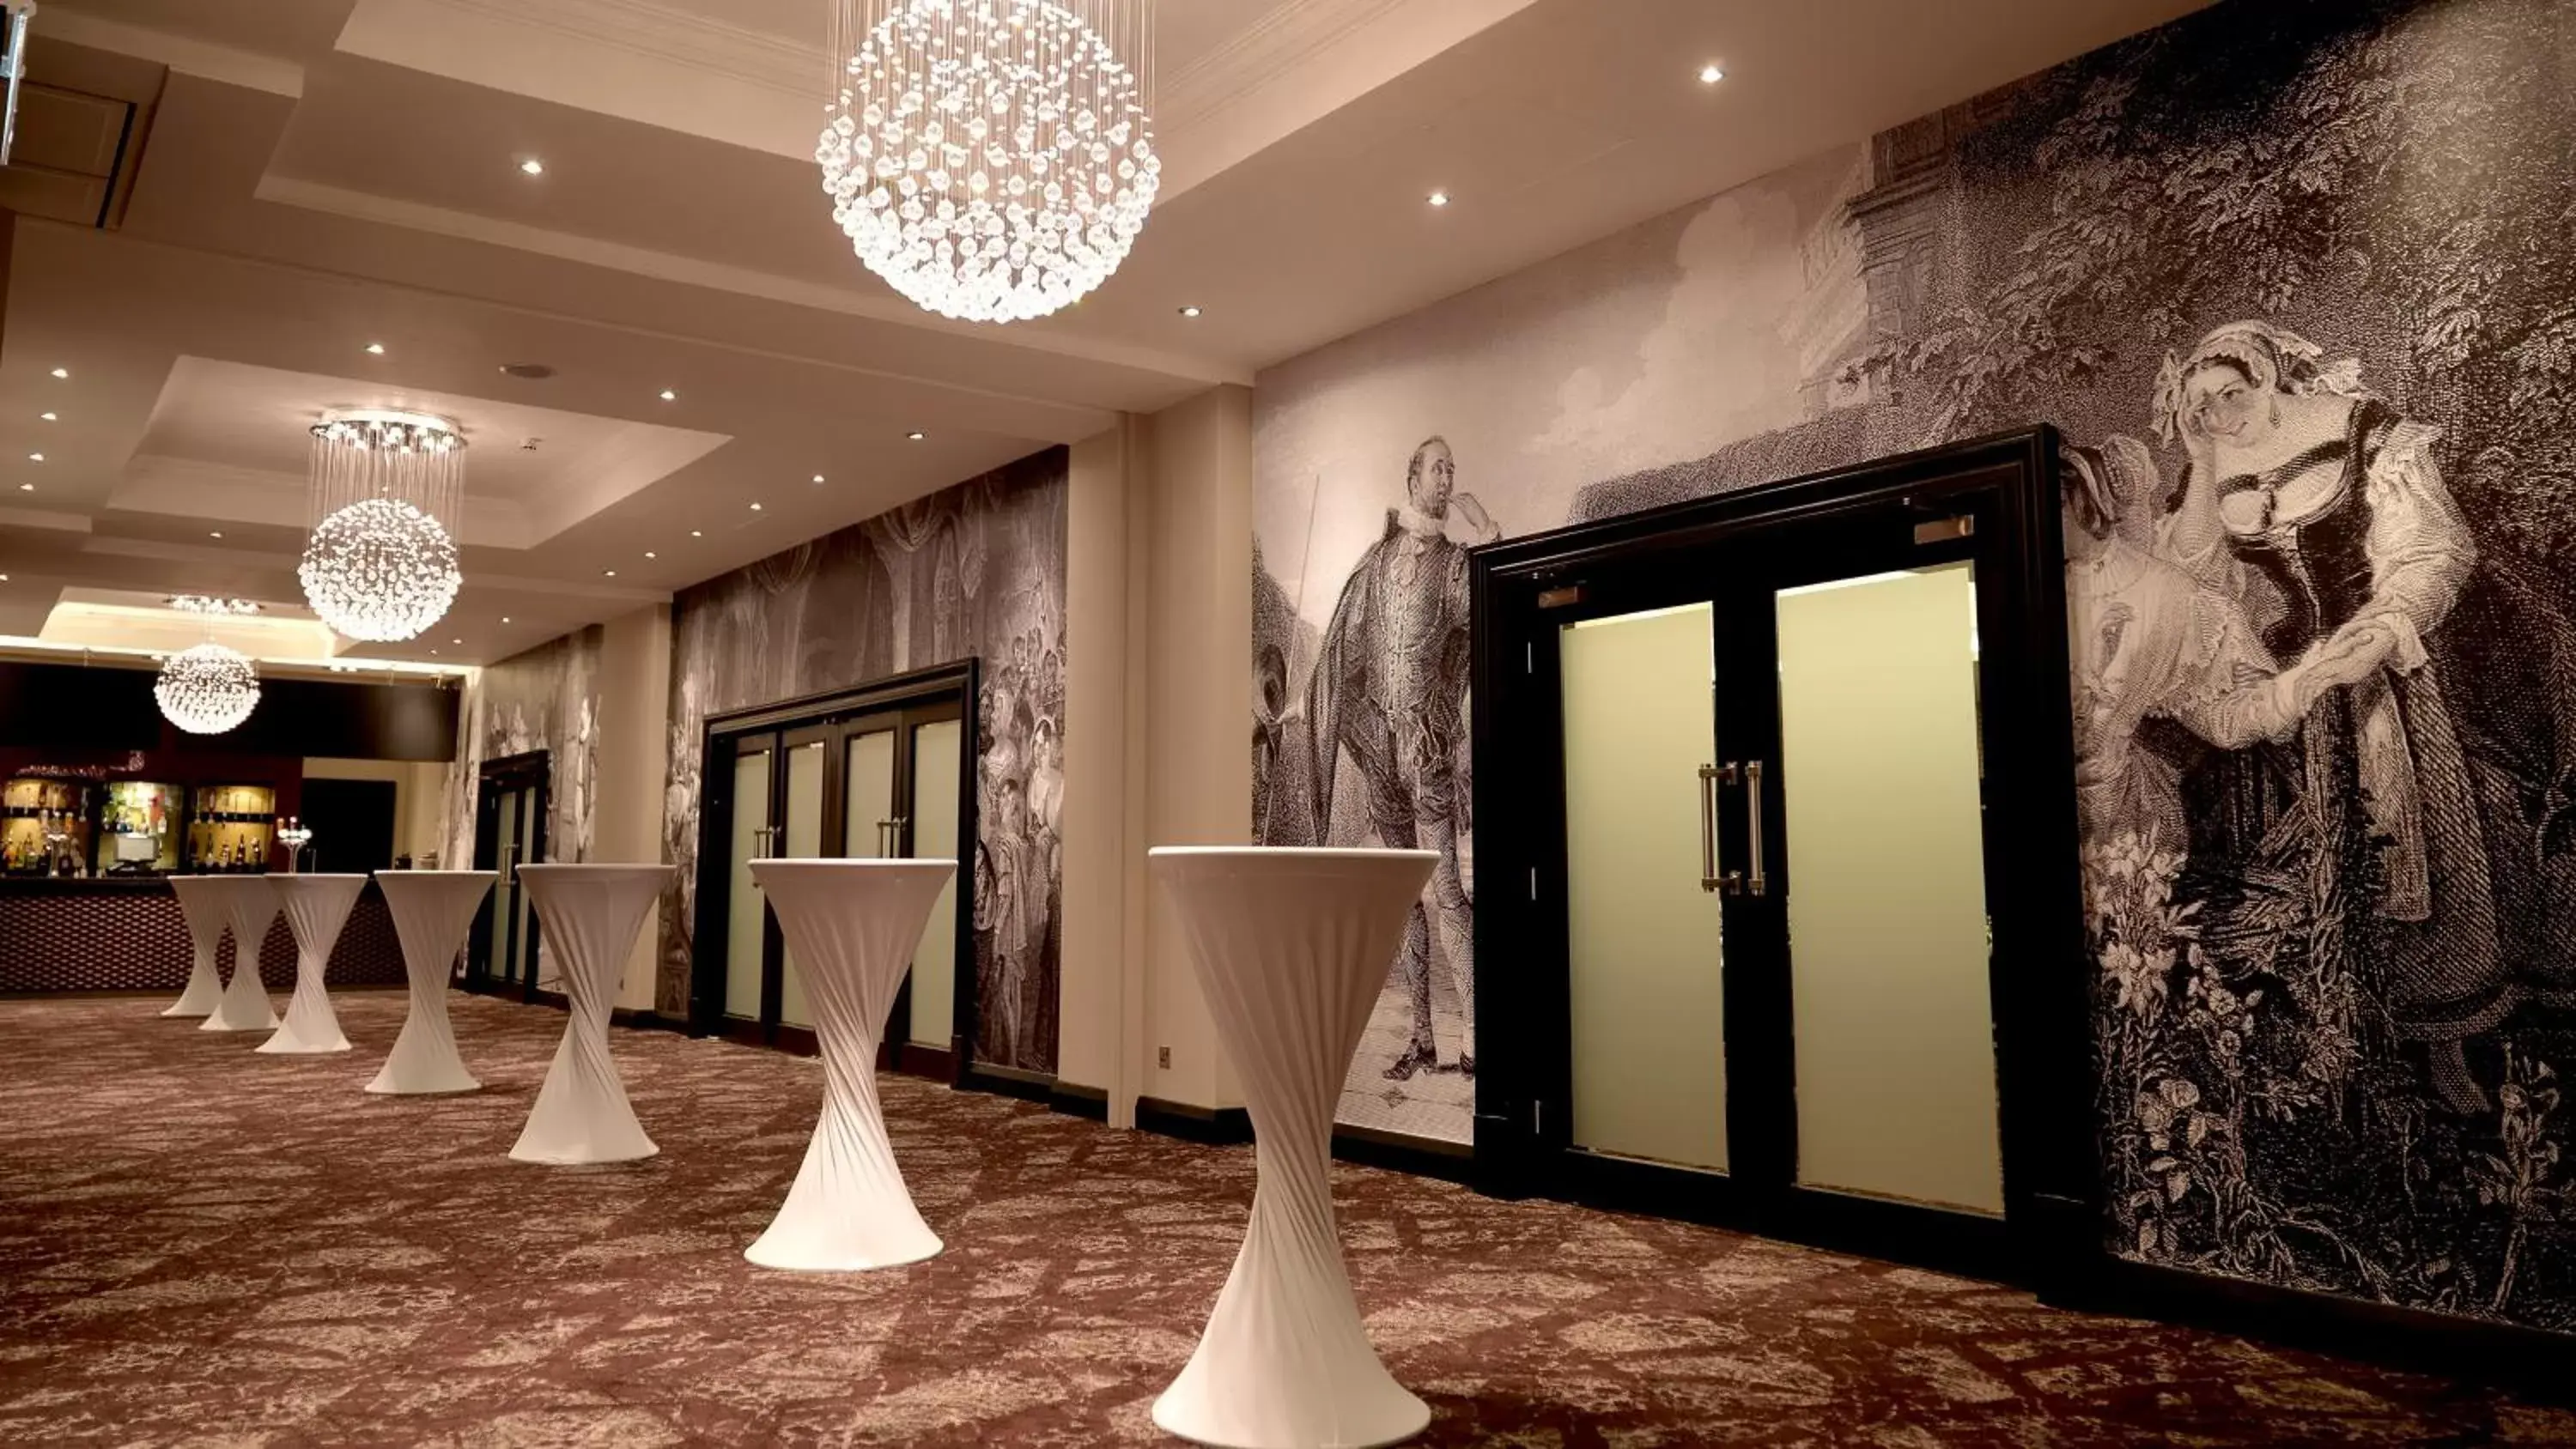 Meeting/conference room, Banquet Facilities in Crowne Plaza Stratford-upon-Avon, an IHG Hotel